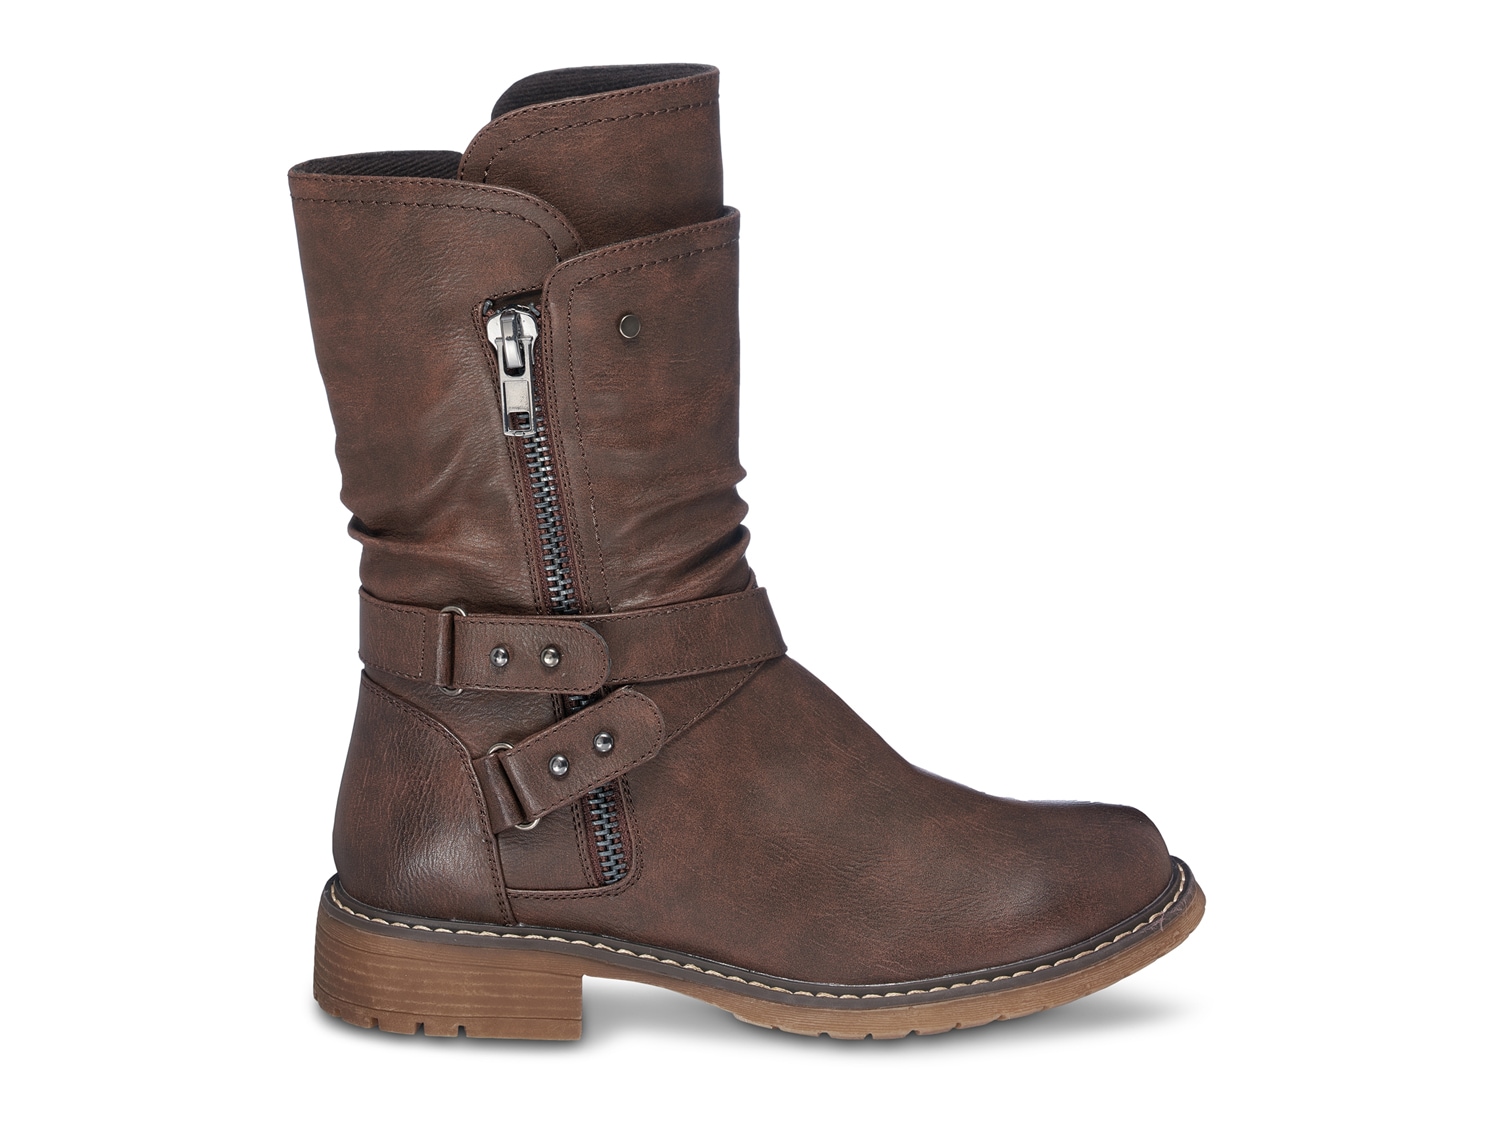 GC Shoes Brandy Riding Boot | DSW